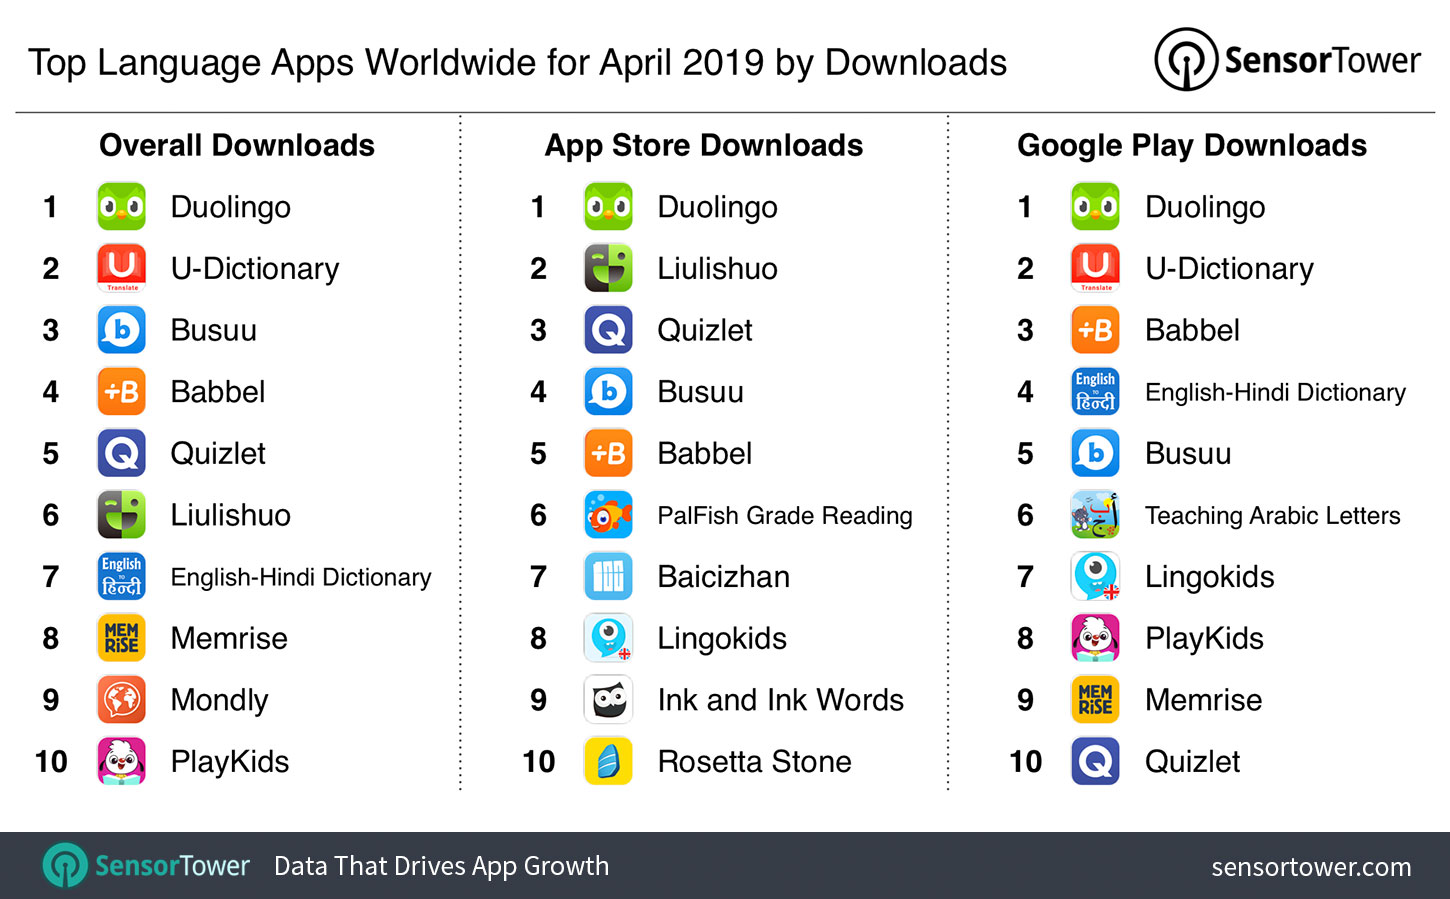 Top Language Apps Worldwide for April 2019 by Downloads